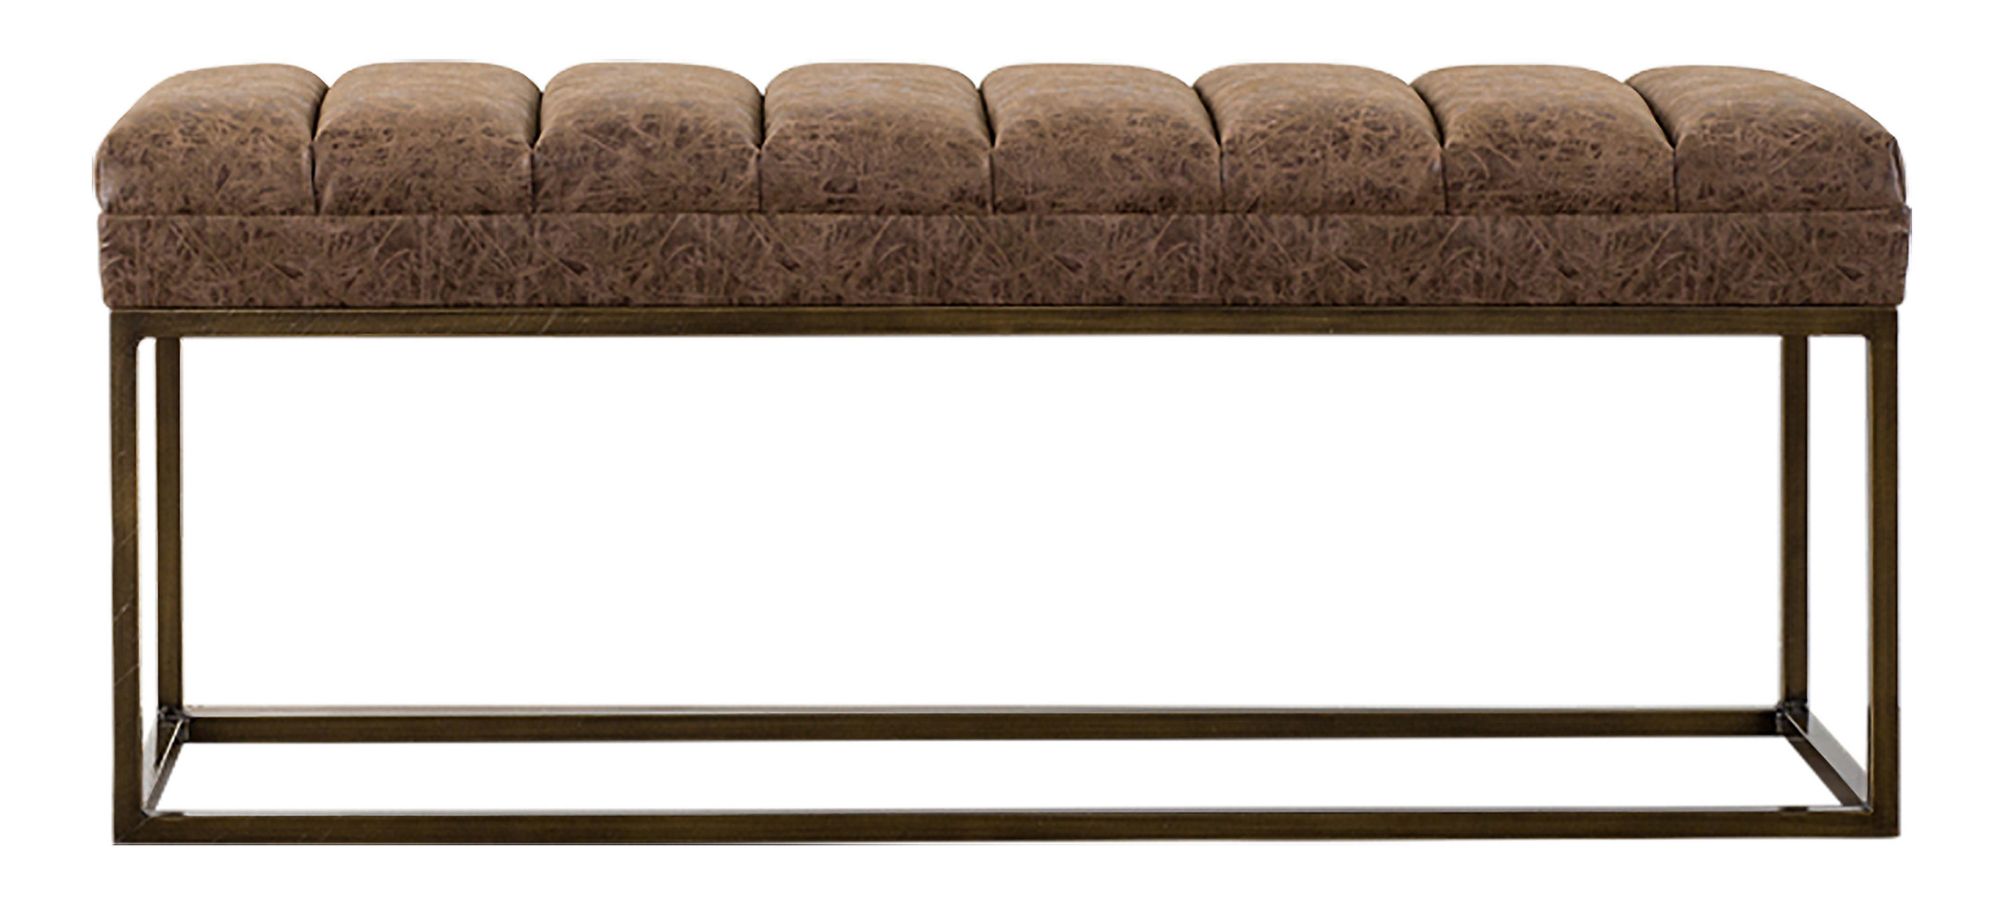 Darius PU Leather Bench in Nubuck Chocolate by New Pacific Direct